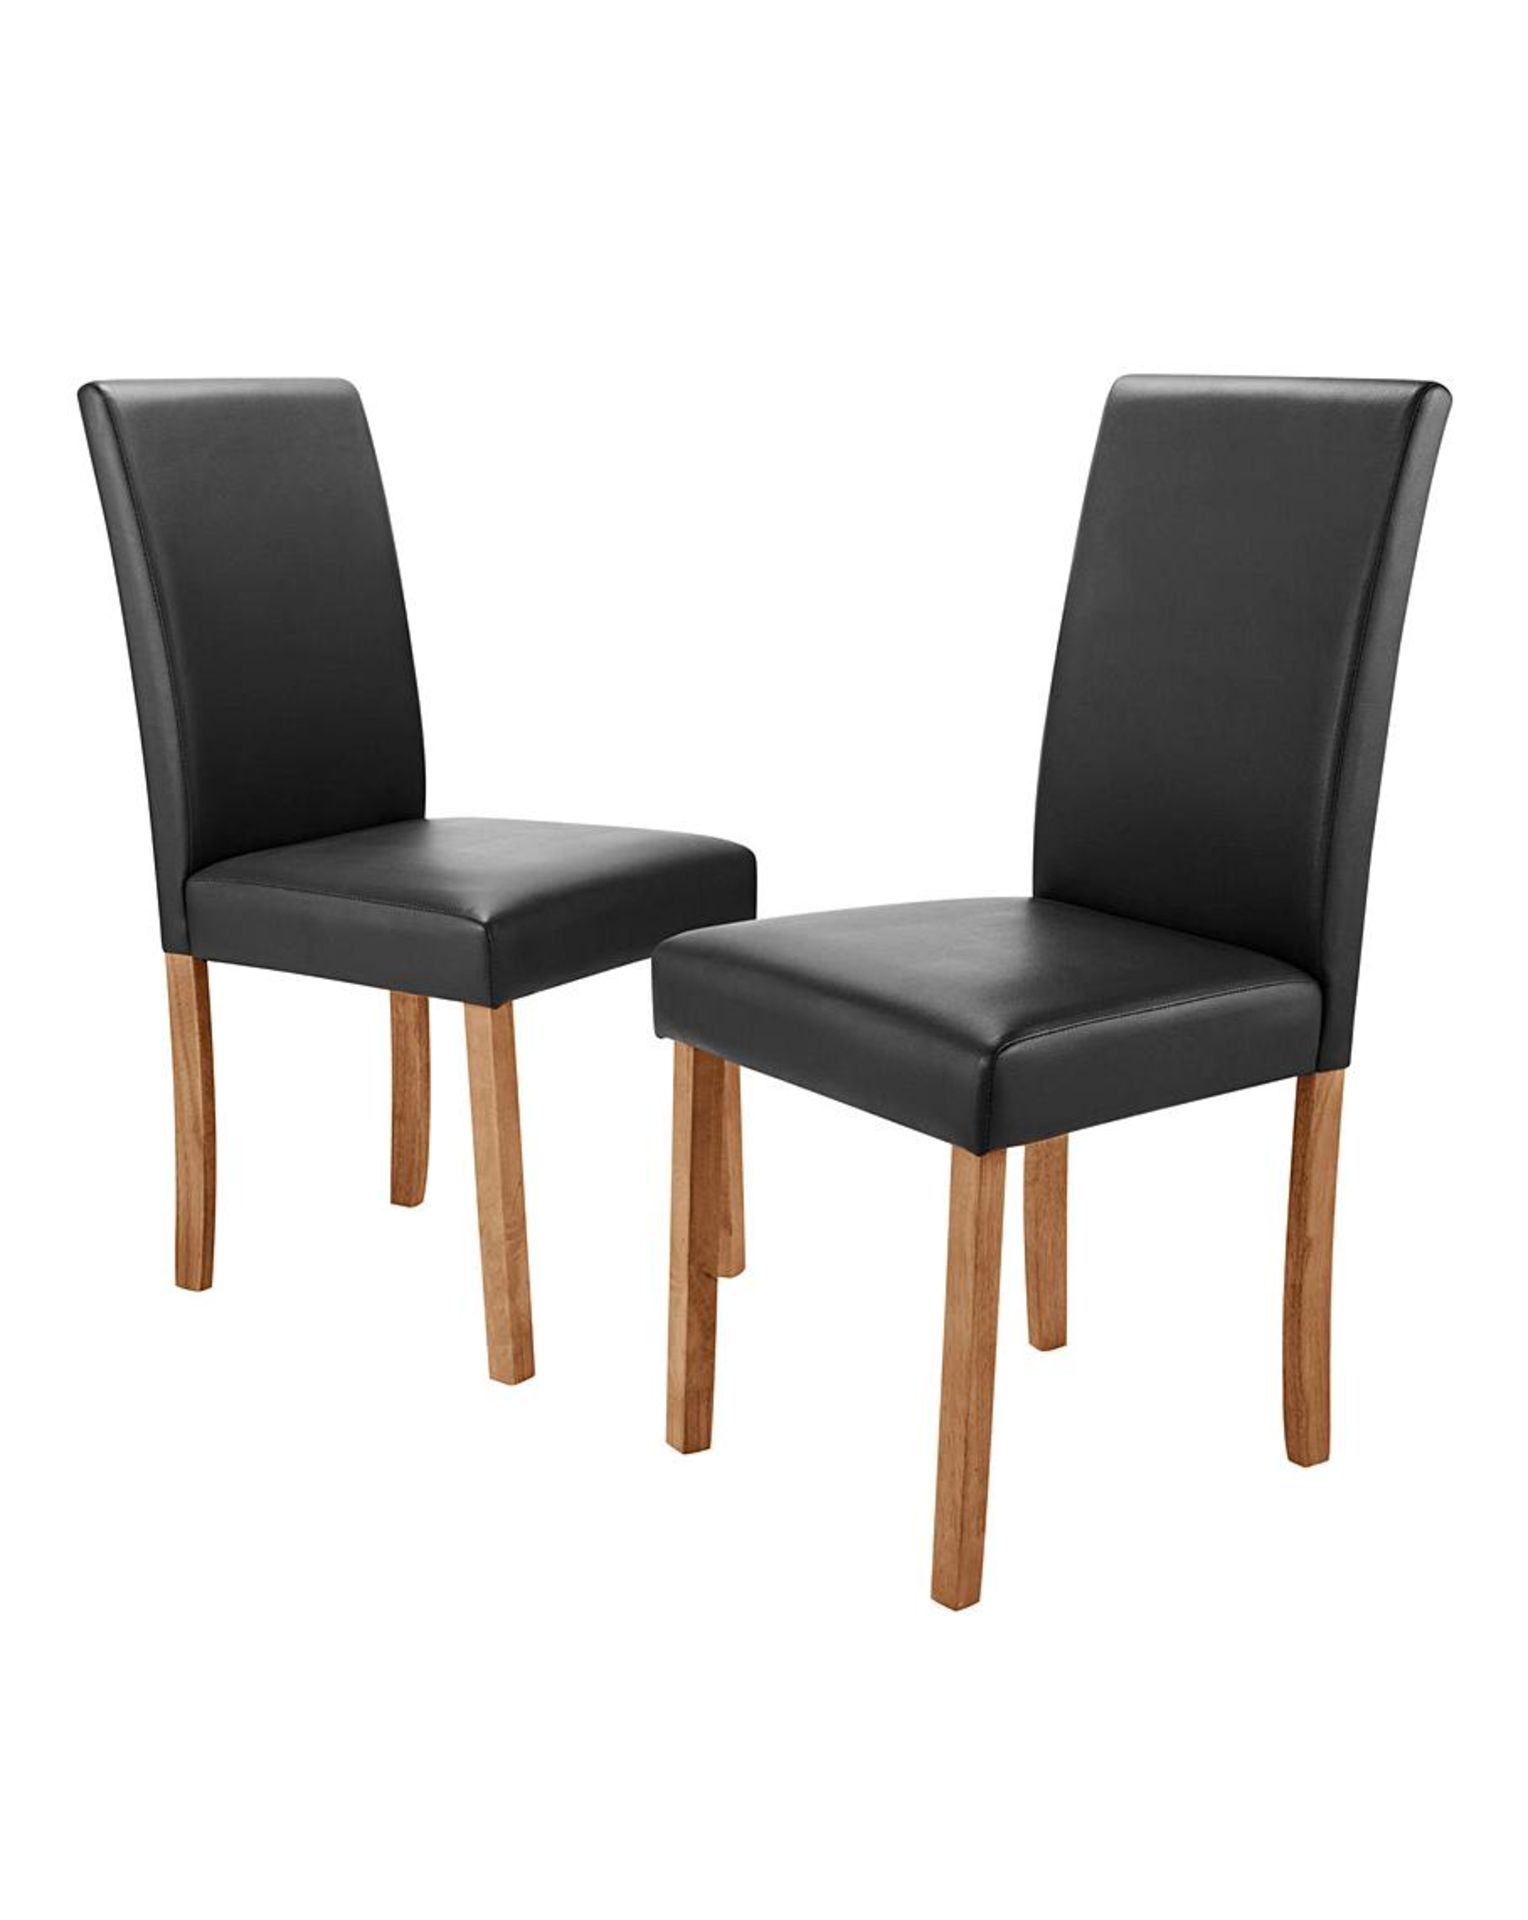 Pair of Ava Faux Leather Dining Chairs. - SR4. The Ava Faux Leather Dining Chairs are classic dining